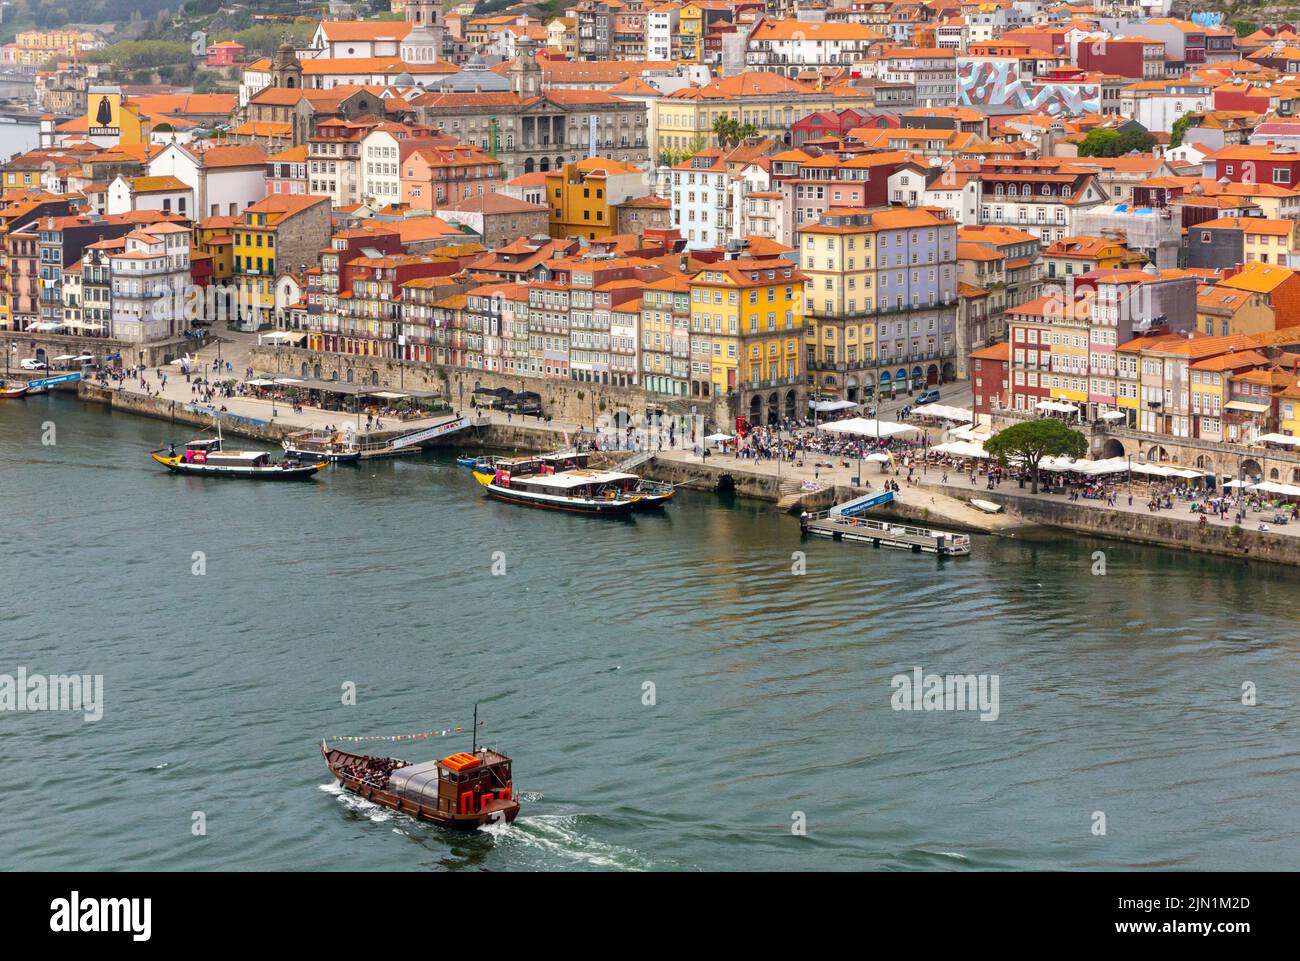 Tourist boat sailing on the River Douro in the centre of Porto a major city in northern Portugal. Stock Photo